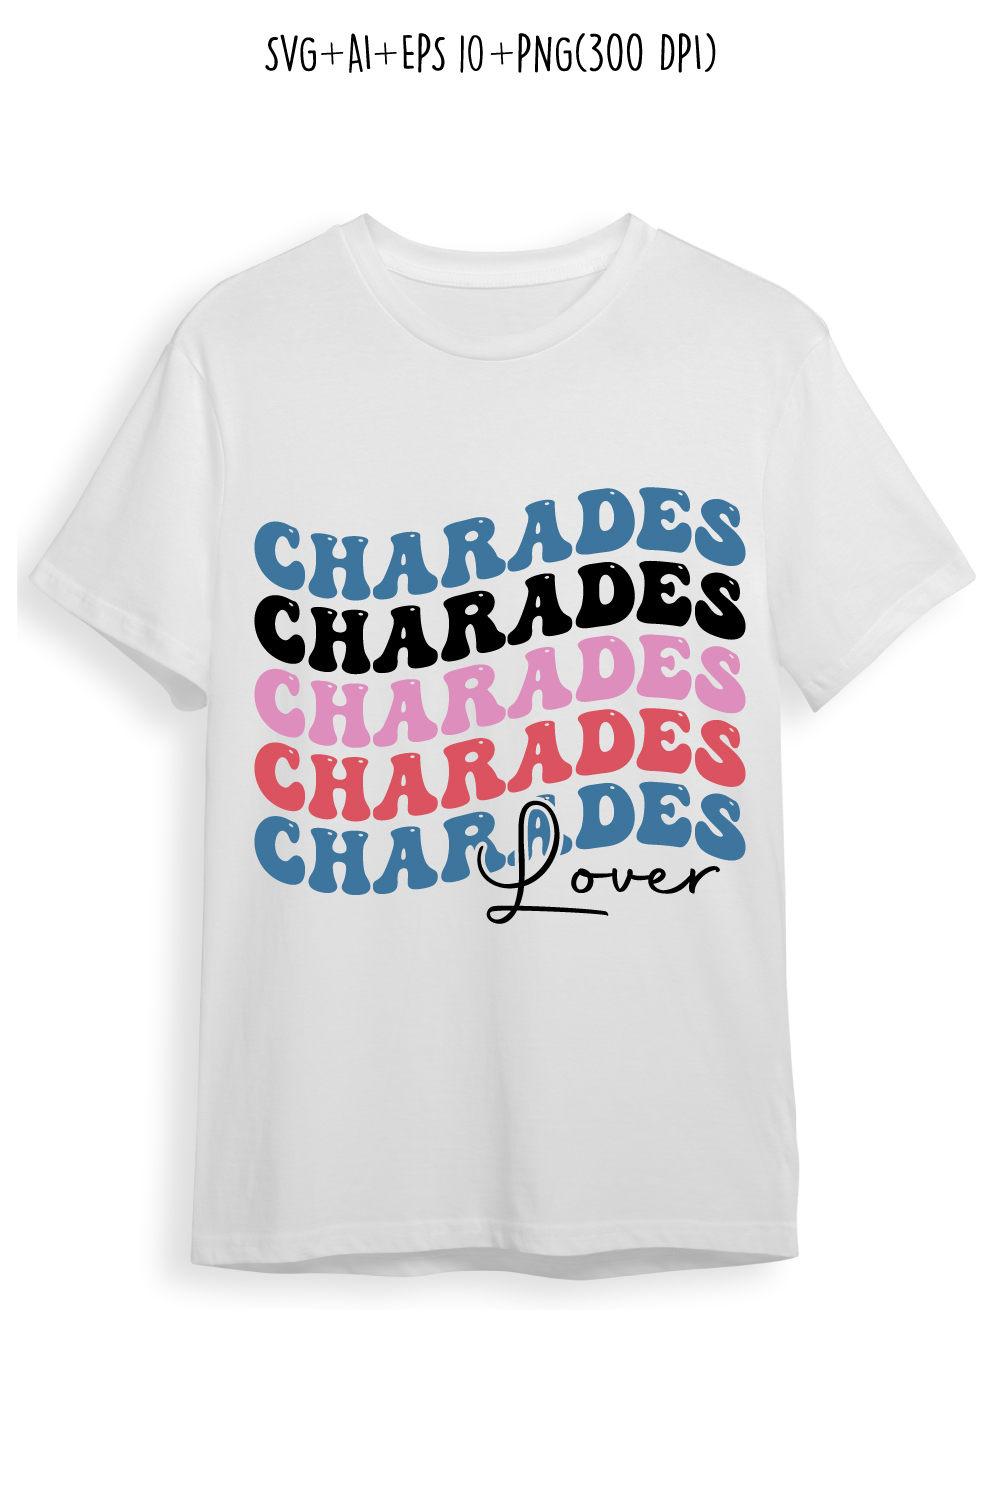 Charades lover indoor game retro typography design for t-shirts, cards, frame artwork, phone cases, bags, mugs, stickers, tumblers, print, etc pinterest preview image.